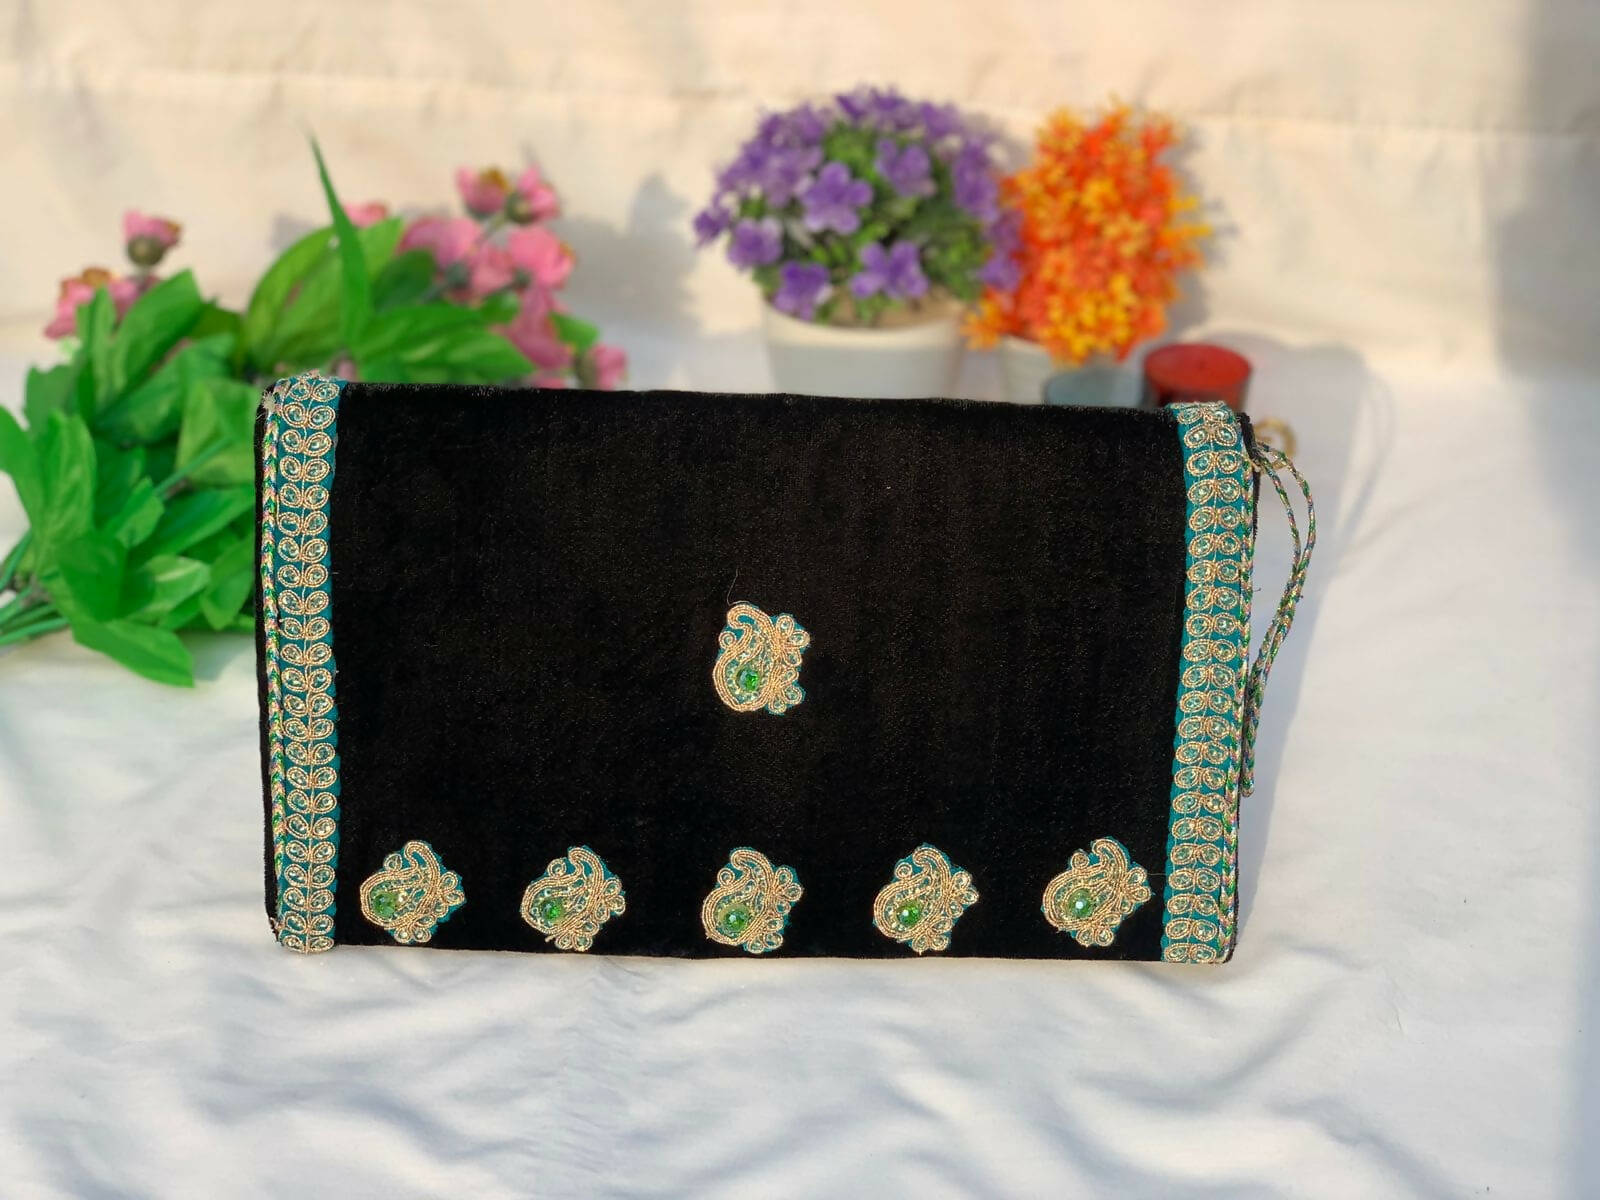 Hand Crafted Black Velvet Hand Bag Made With Recycled Cloth Pieces | Women Handbags | New